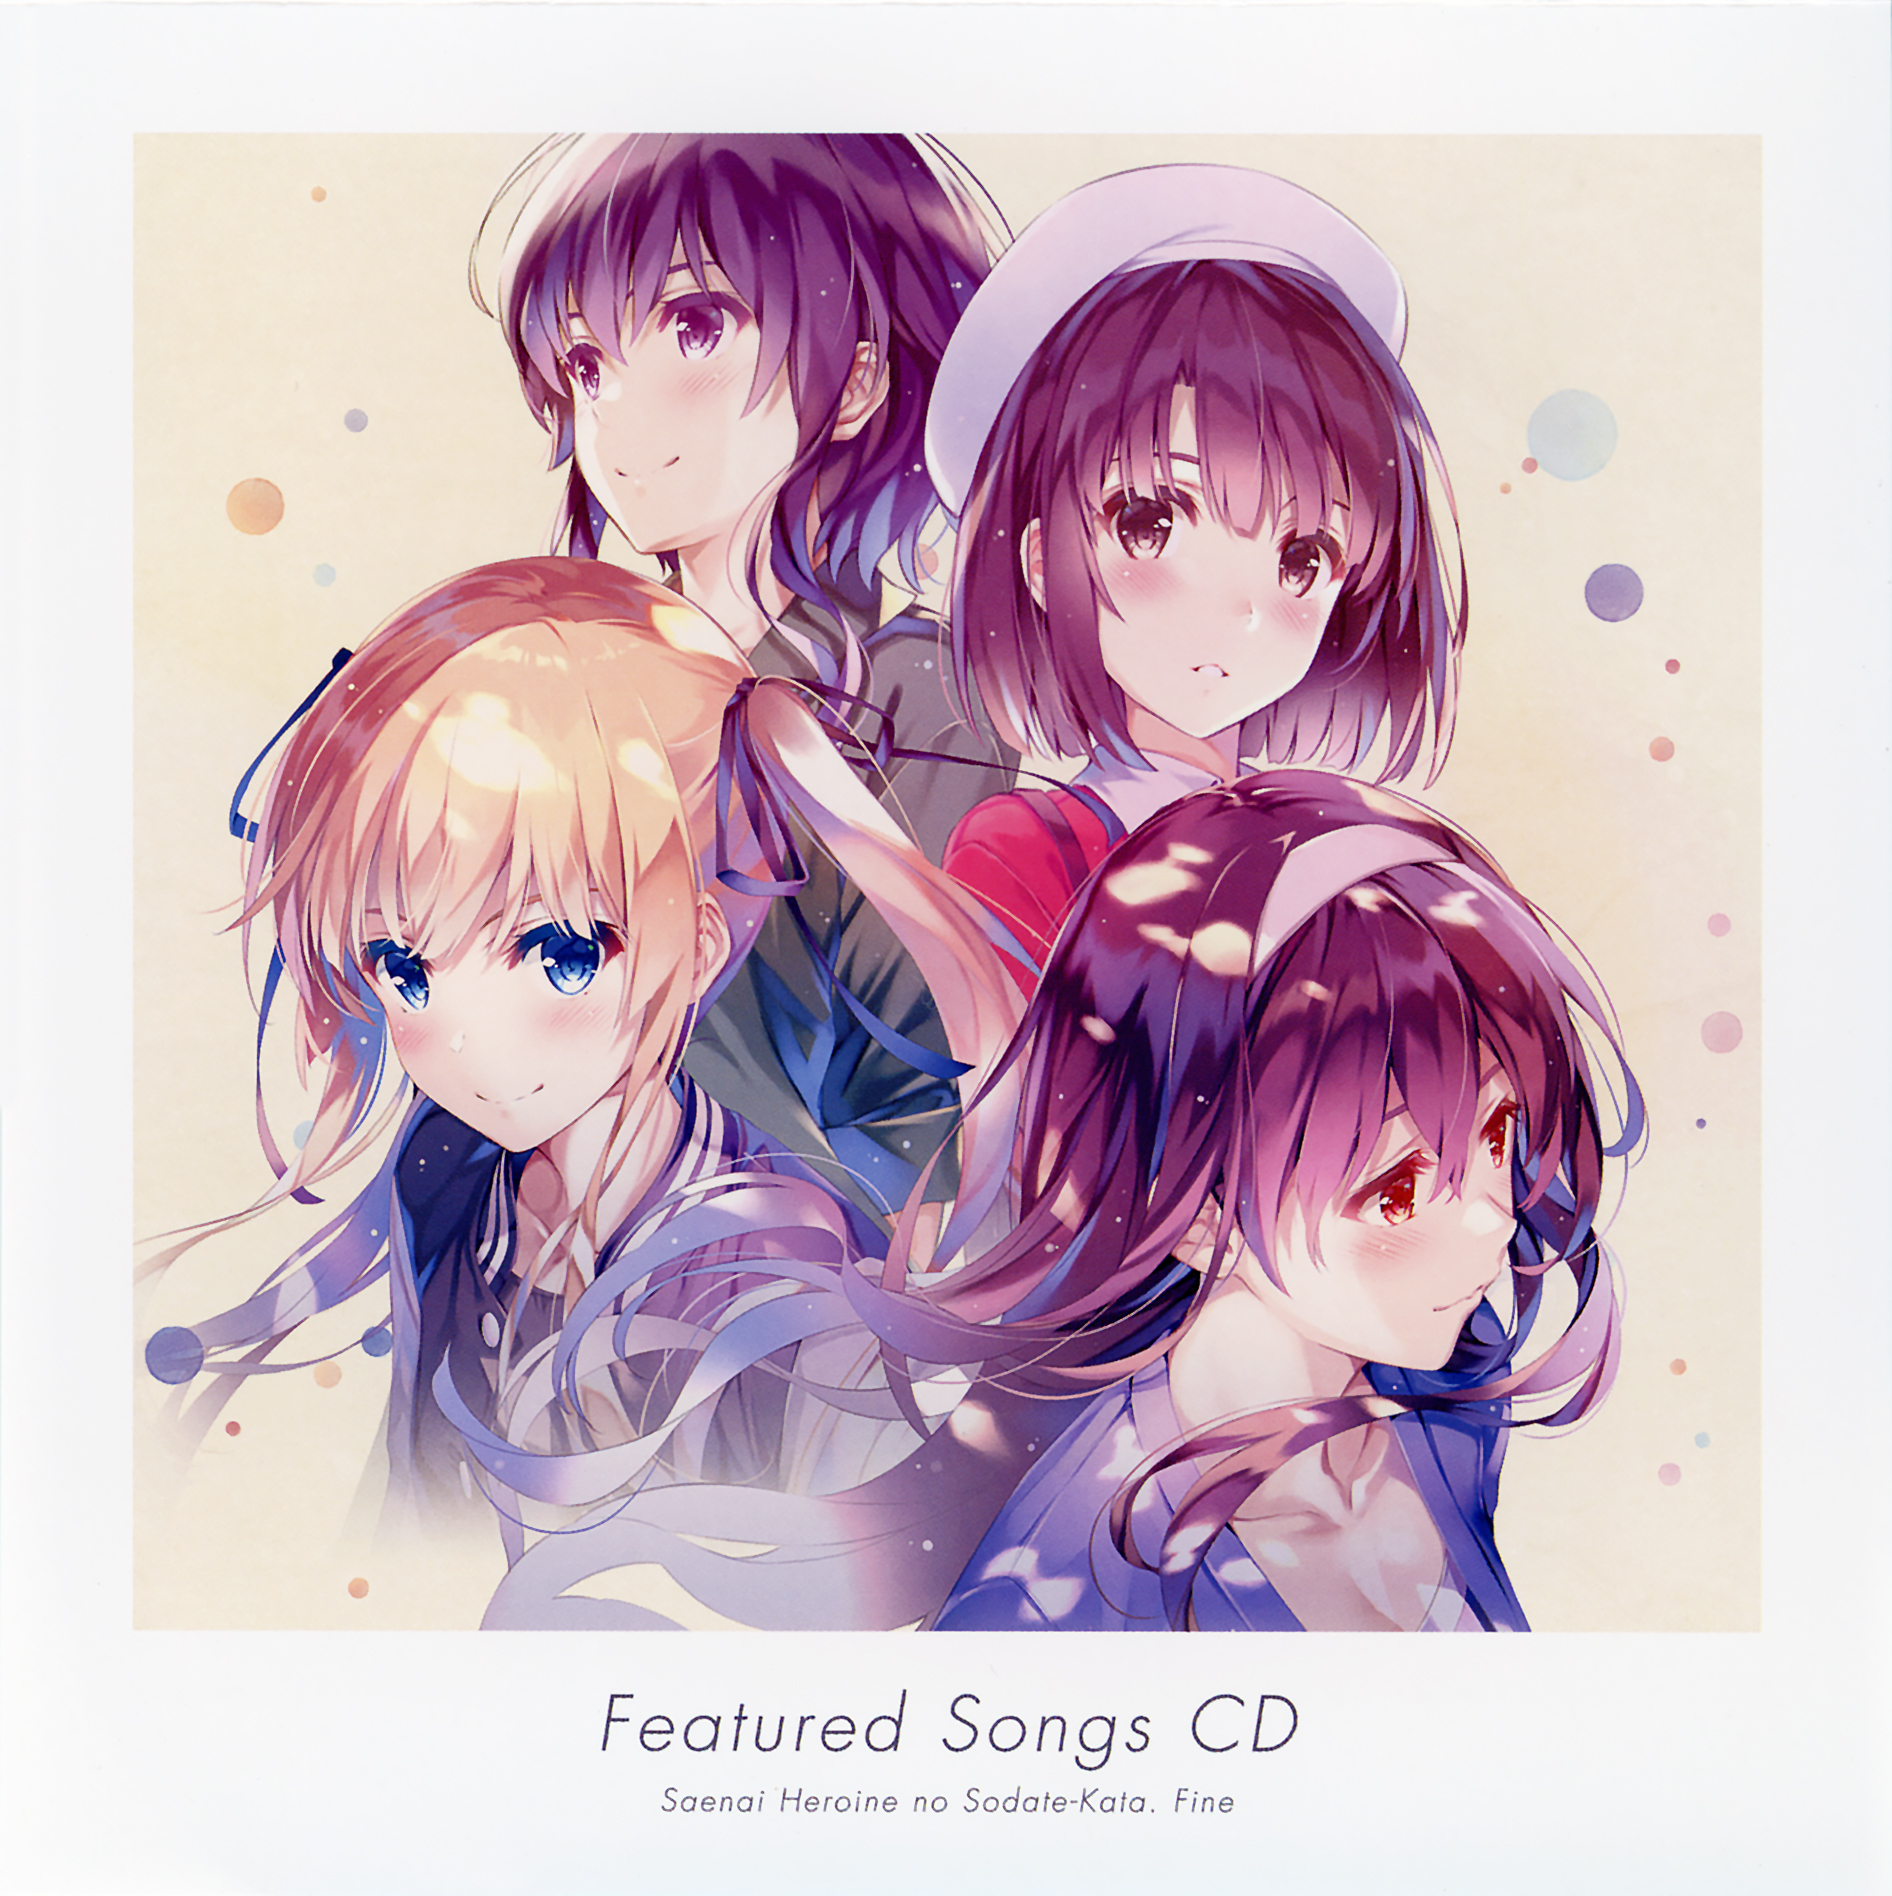 Release 冴えない彼女の育てかた Fine Featured Songs By Various Artists Musicbrainz